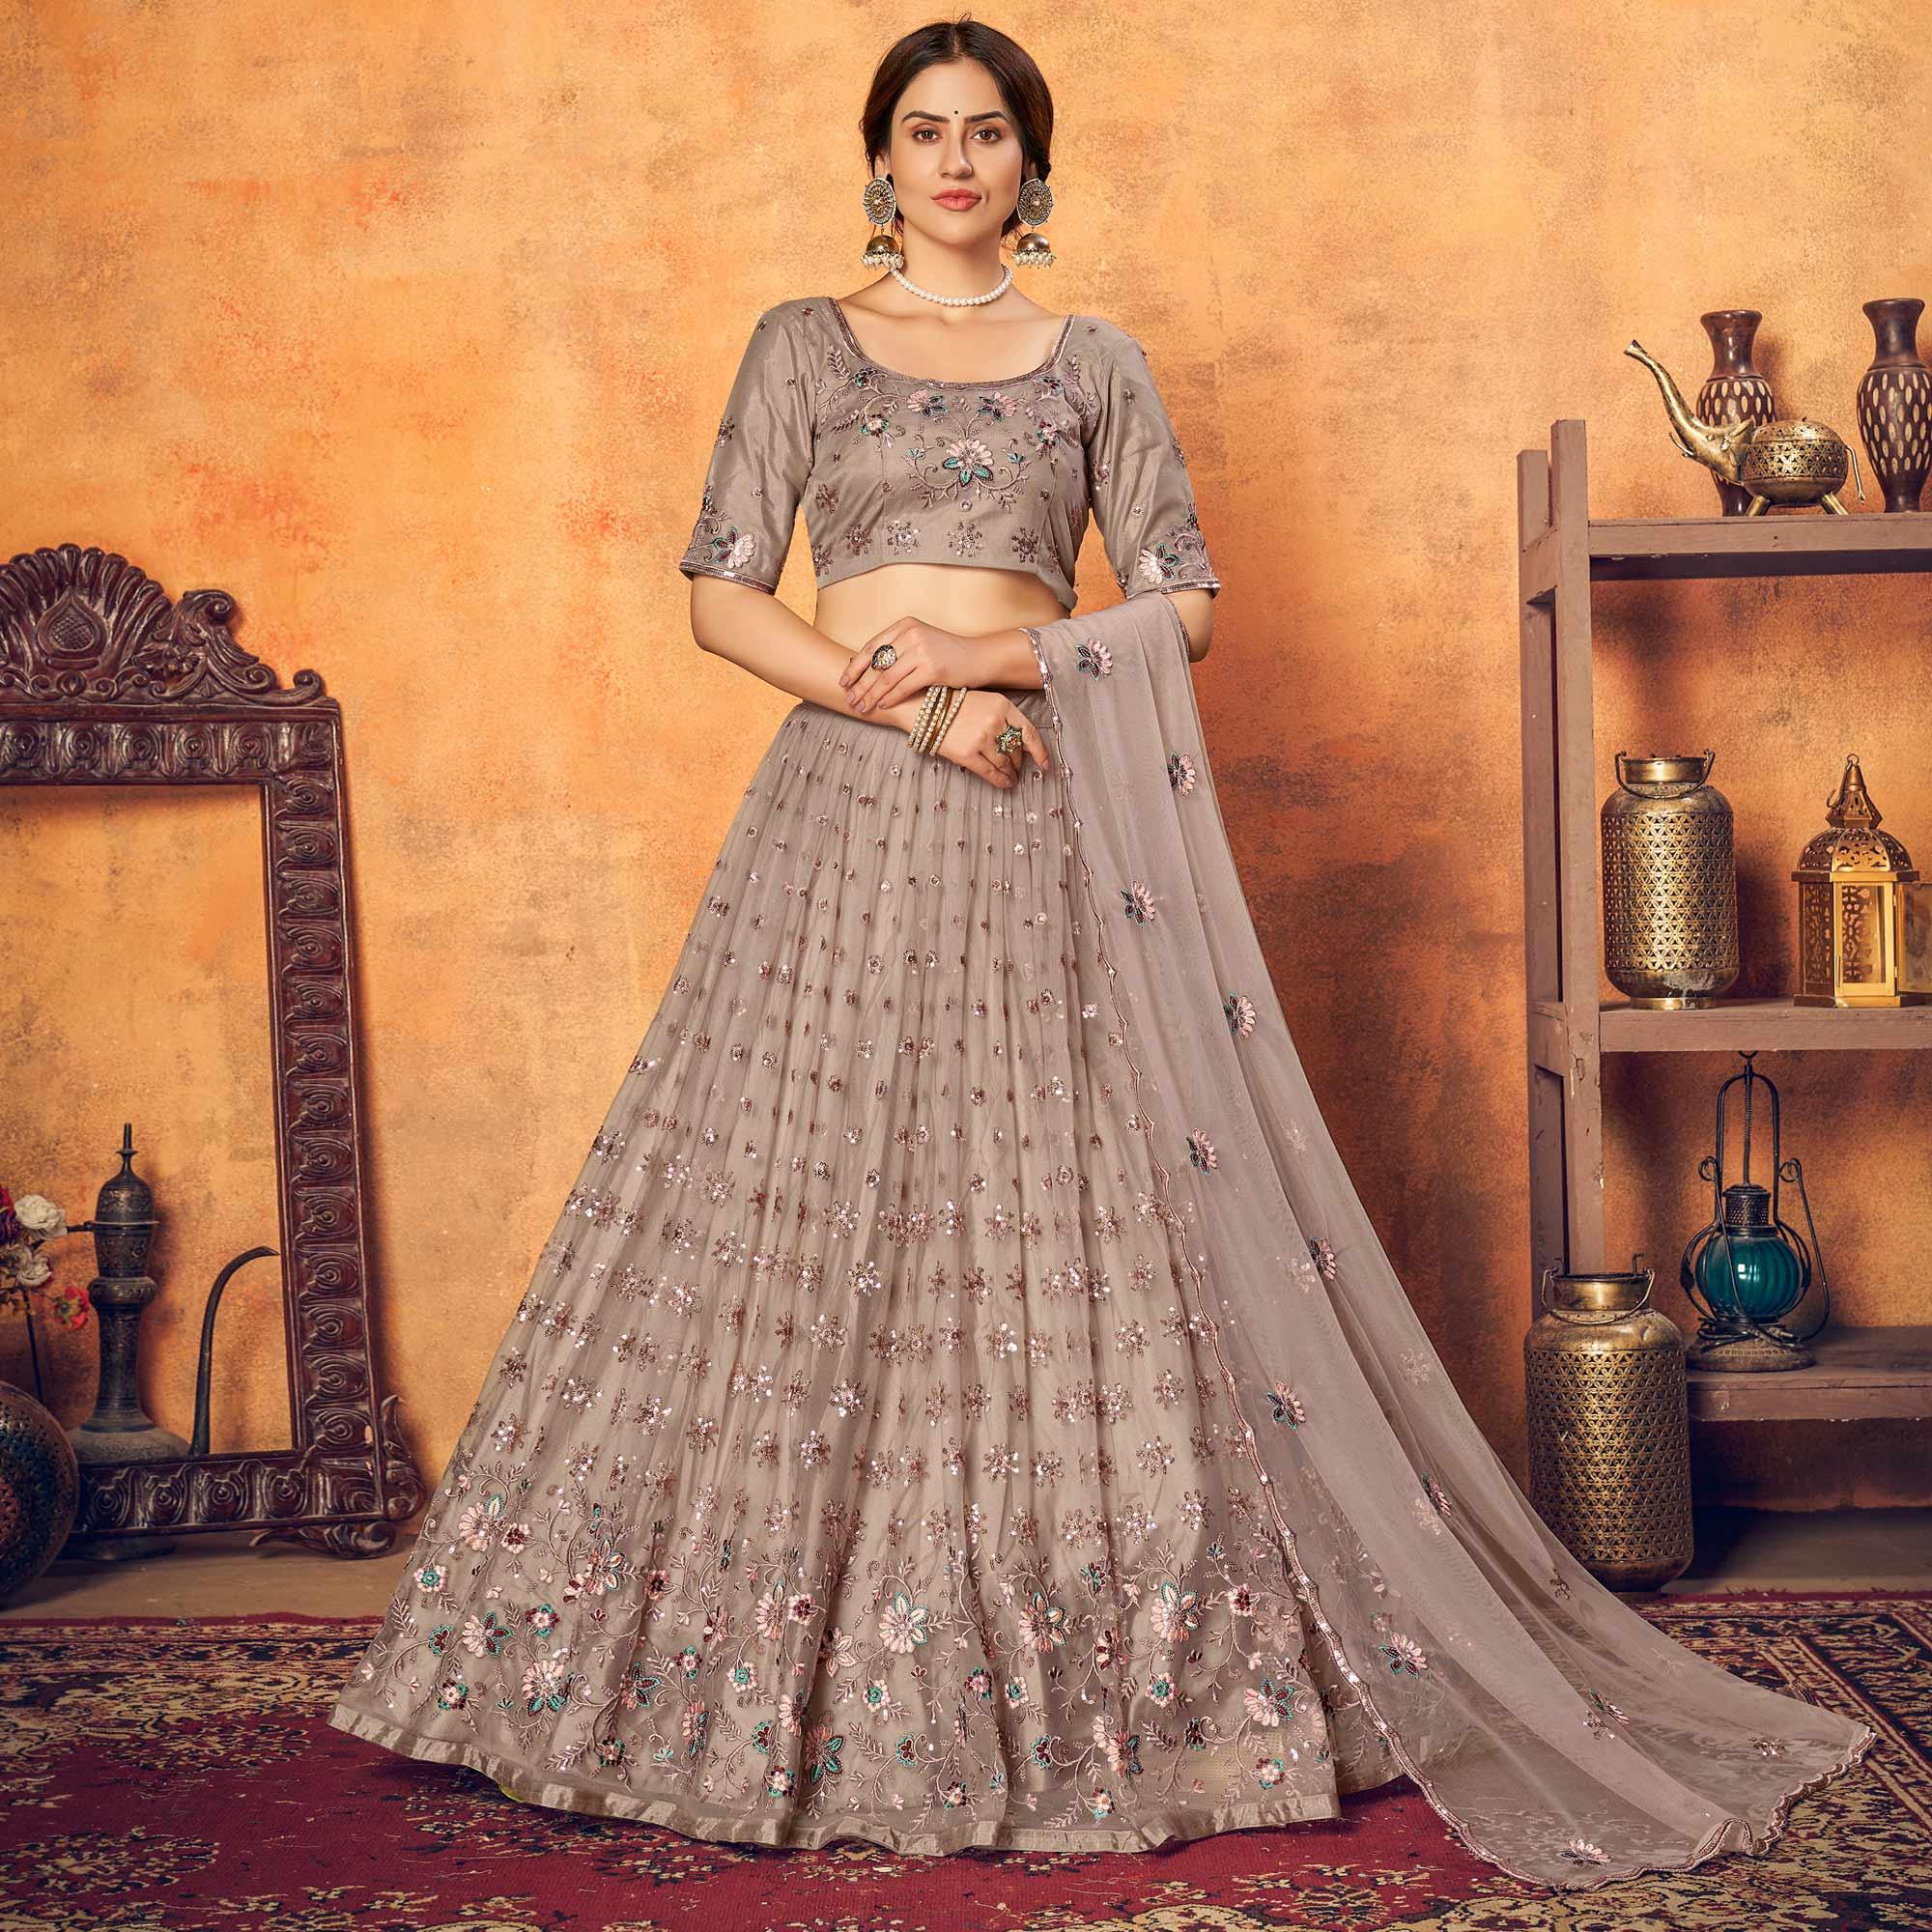 Dusty Brown Festive Wear Thread With Floral Sequence Embroidered Net Lehenga Choli - Peachmode